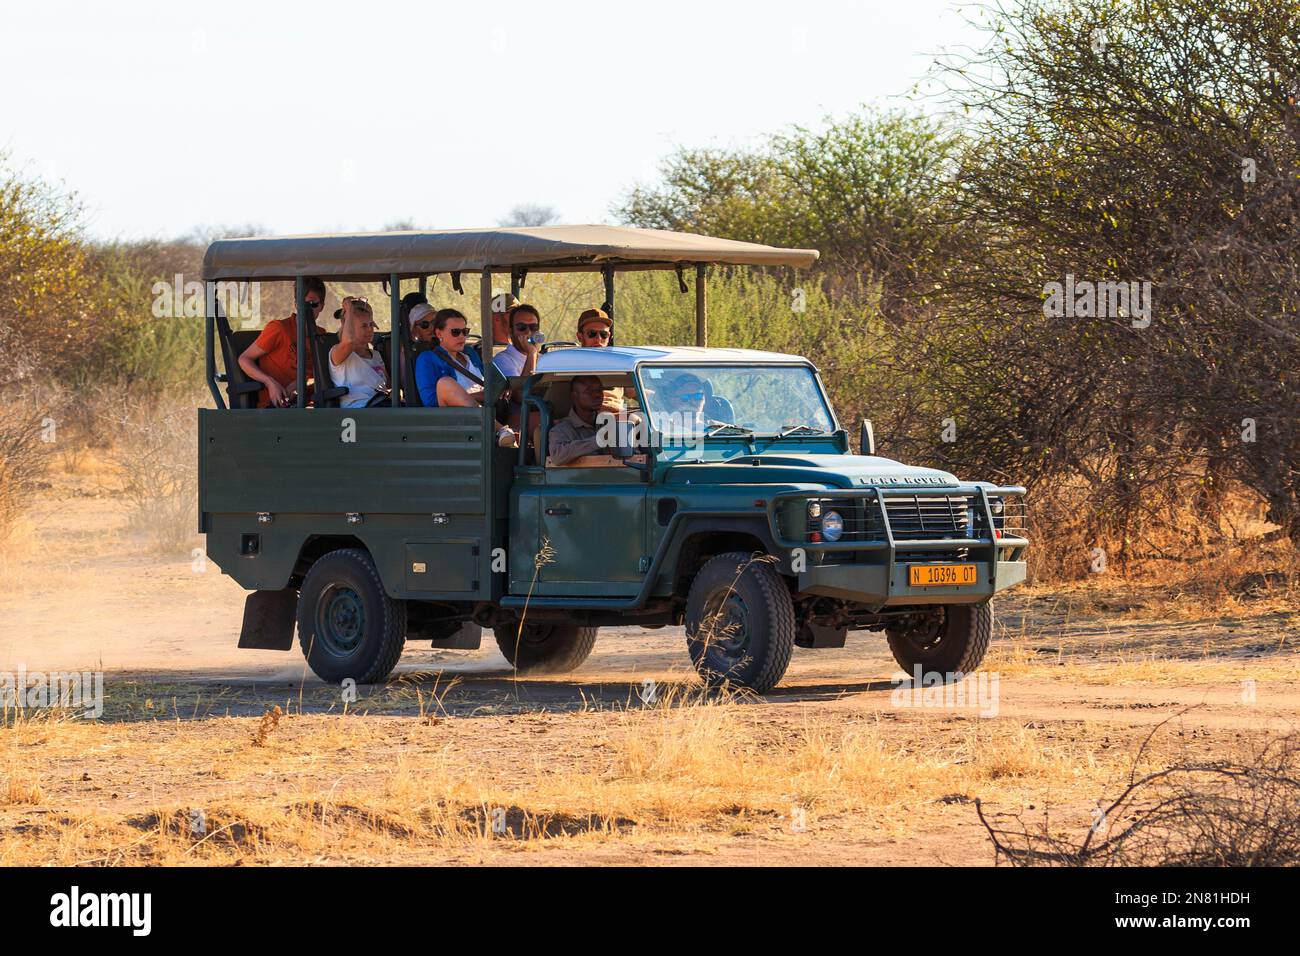 Waterber Plateau National Park, Namibia - 08 October 2018: Tourists viewing game from an open safari vehicle. Sunset over the savannah. Stock Photo